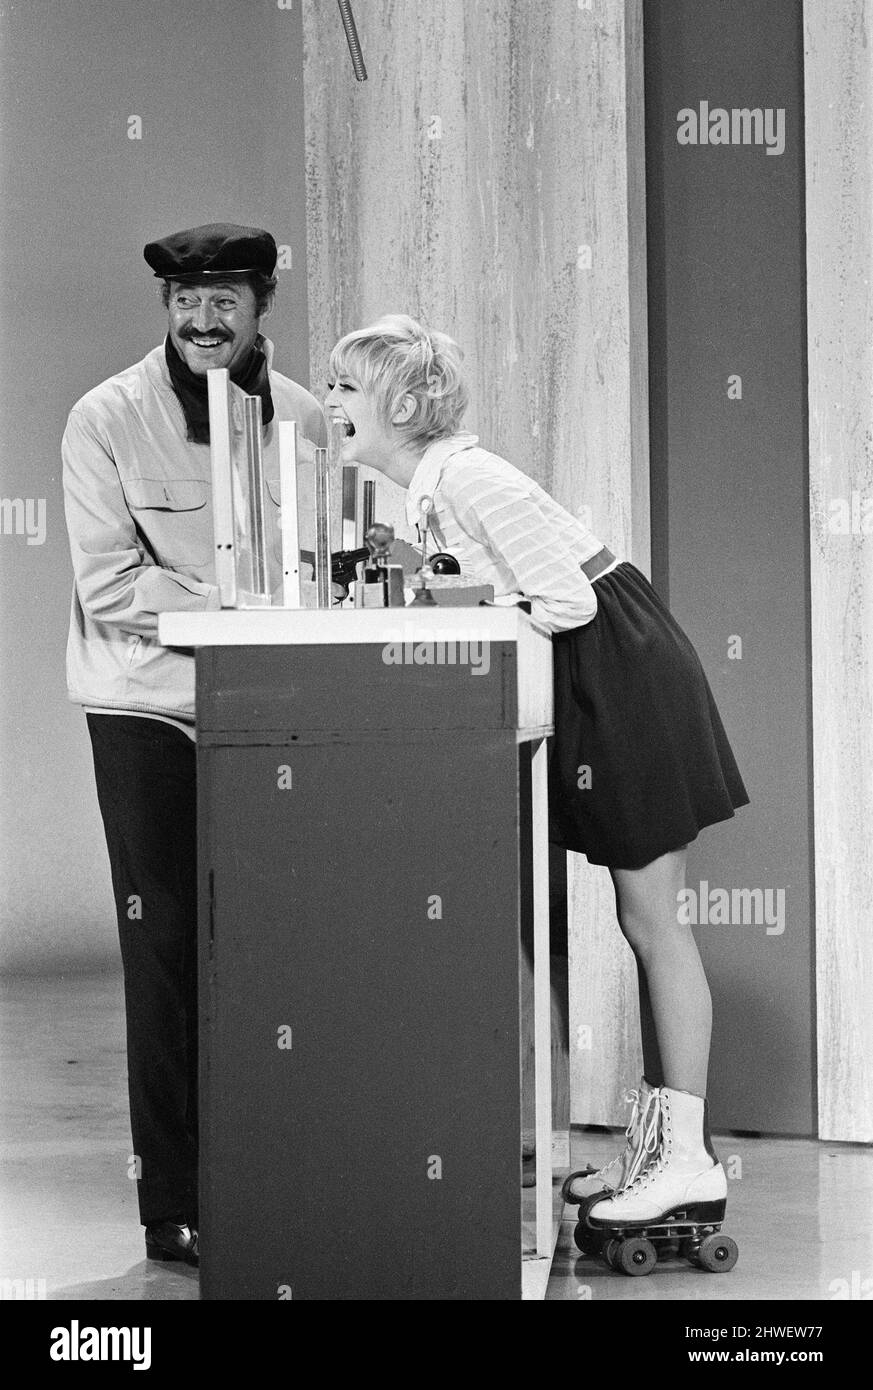 Rowan & Martin's Laugh-In, an American sketch comedy television program on the NBC television network, behind the scenes filming for series 2 episode 22, (aired Monday 3rd March 1969), in studio, Wednesday 15th January 1969. Our picture shows ... actors Dan Rowan and Goldie Hawn. Stock Photo